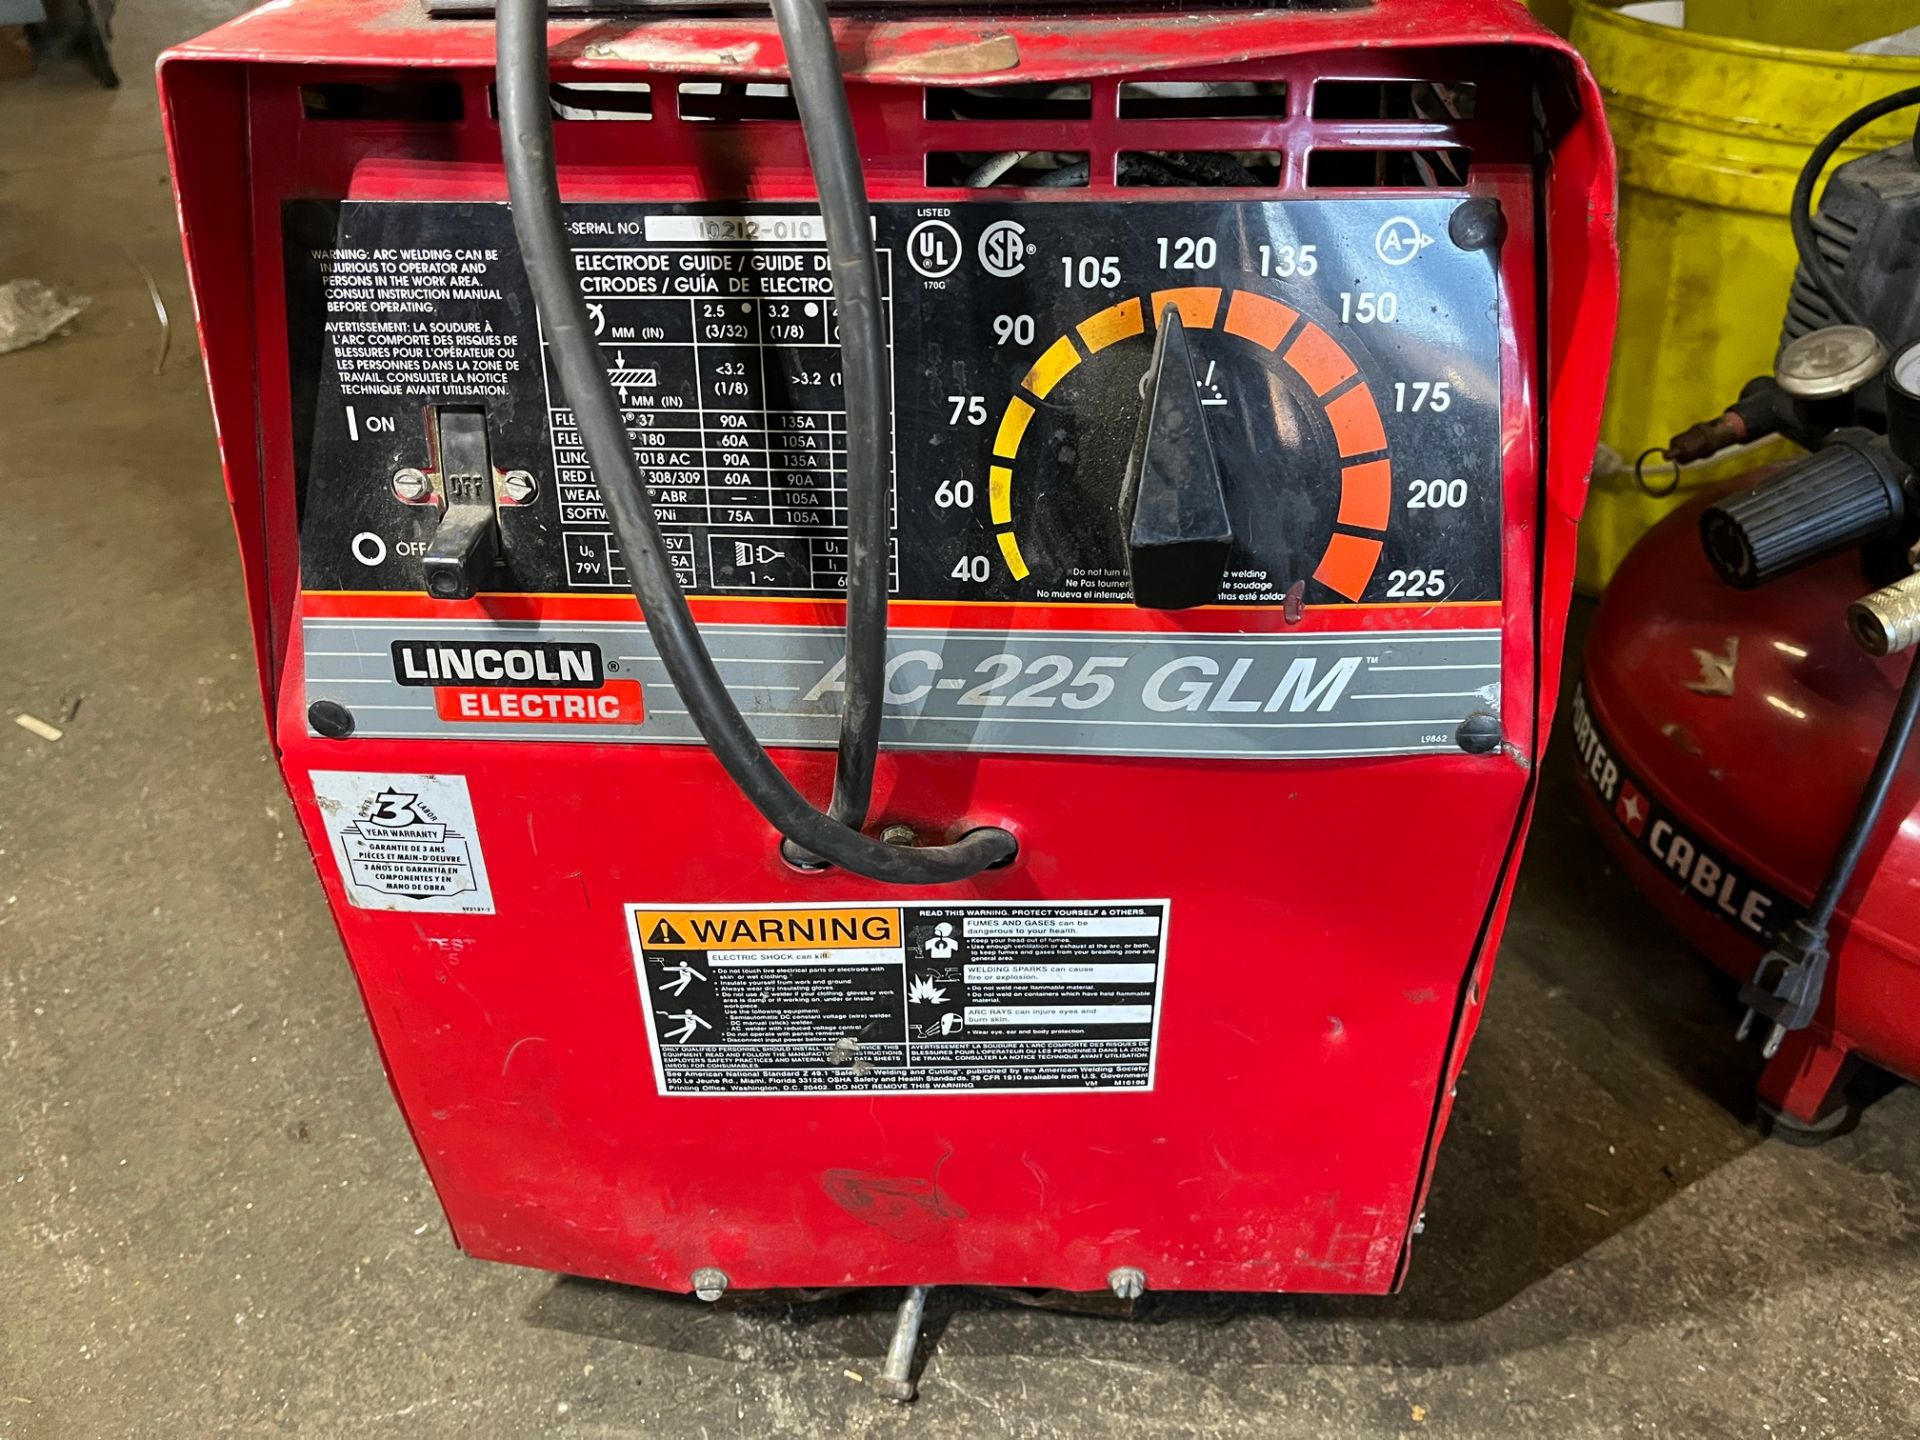 LINCOLN ELECTRIC AC-225 GIM WELDER W/ CABLES AND HELMET - Image 2 of 2